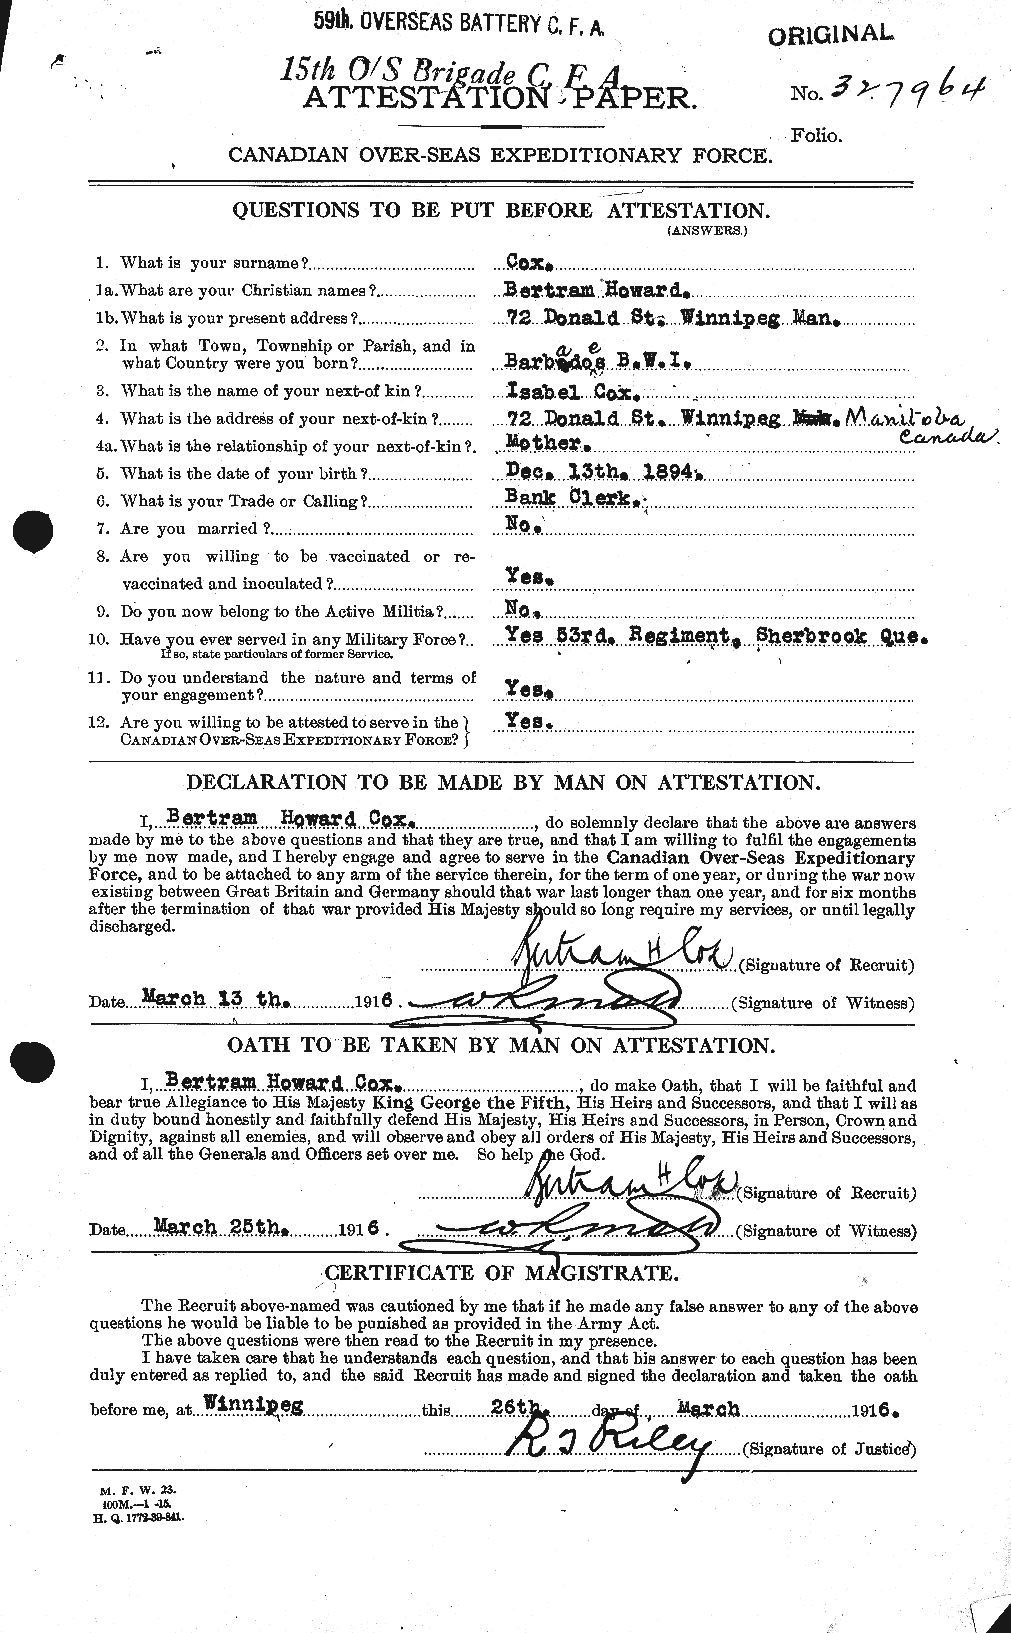 Personnel Records of the First World War - CEF 070330a